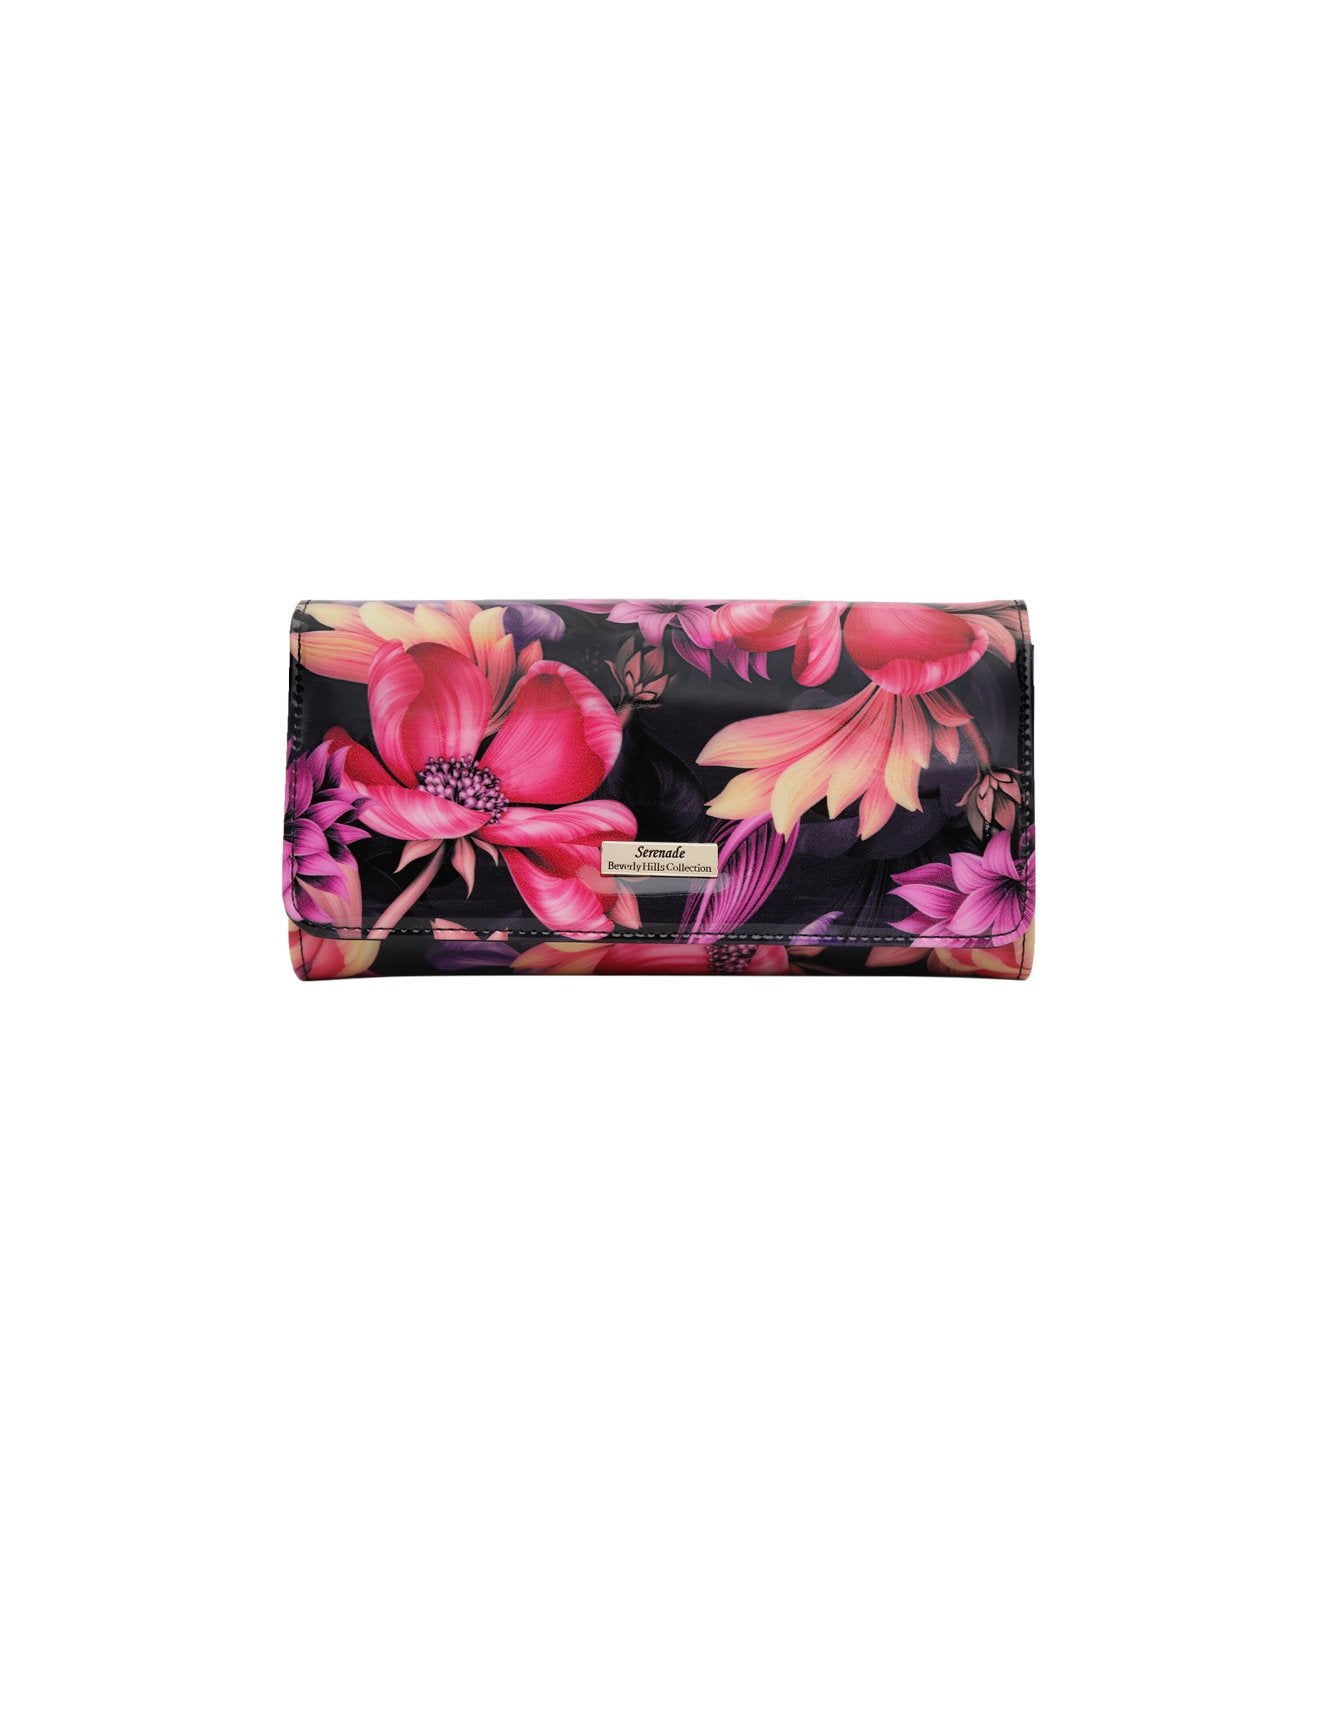 Serenade - Cynthia WSN-2601 RFID Protected Large Leather Wallet - Floral-1